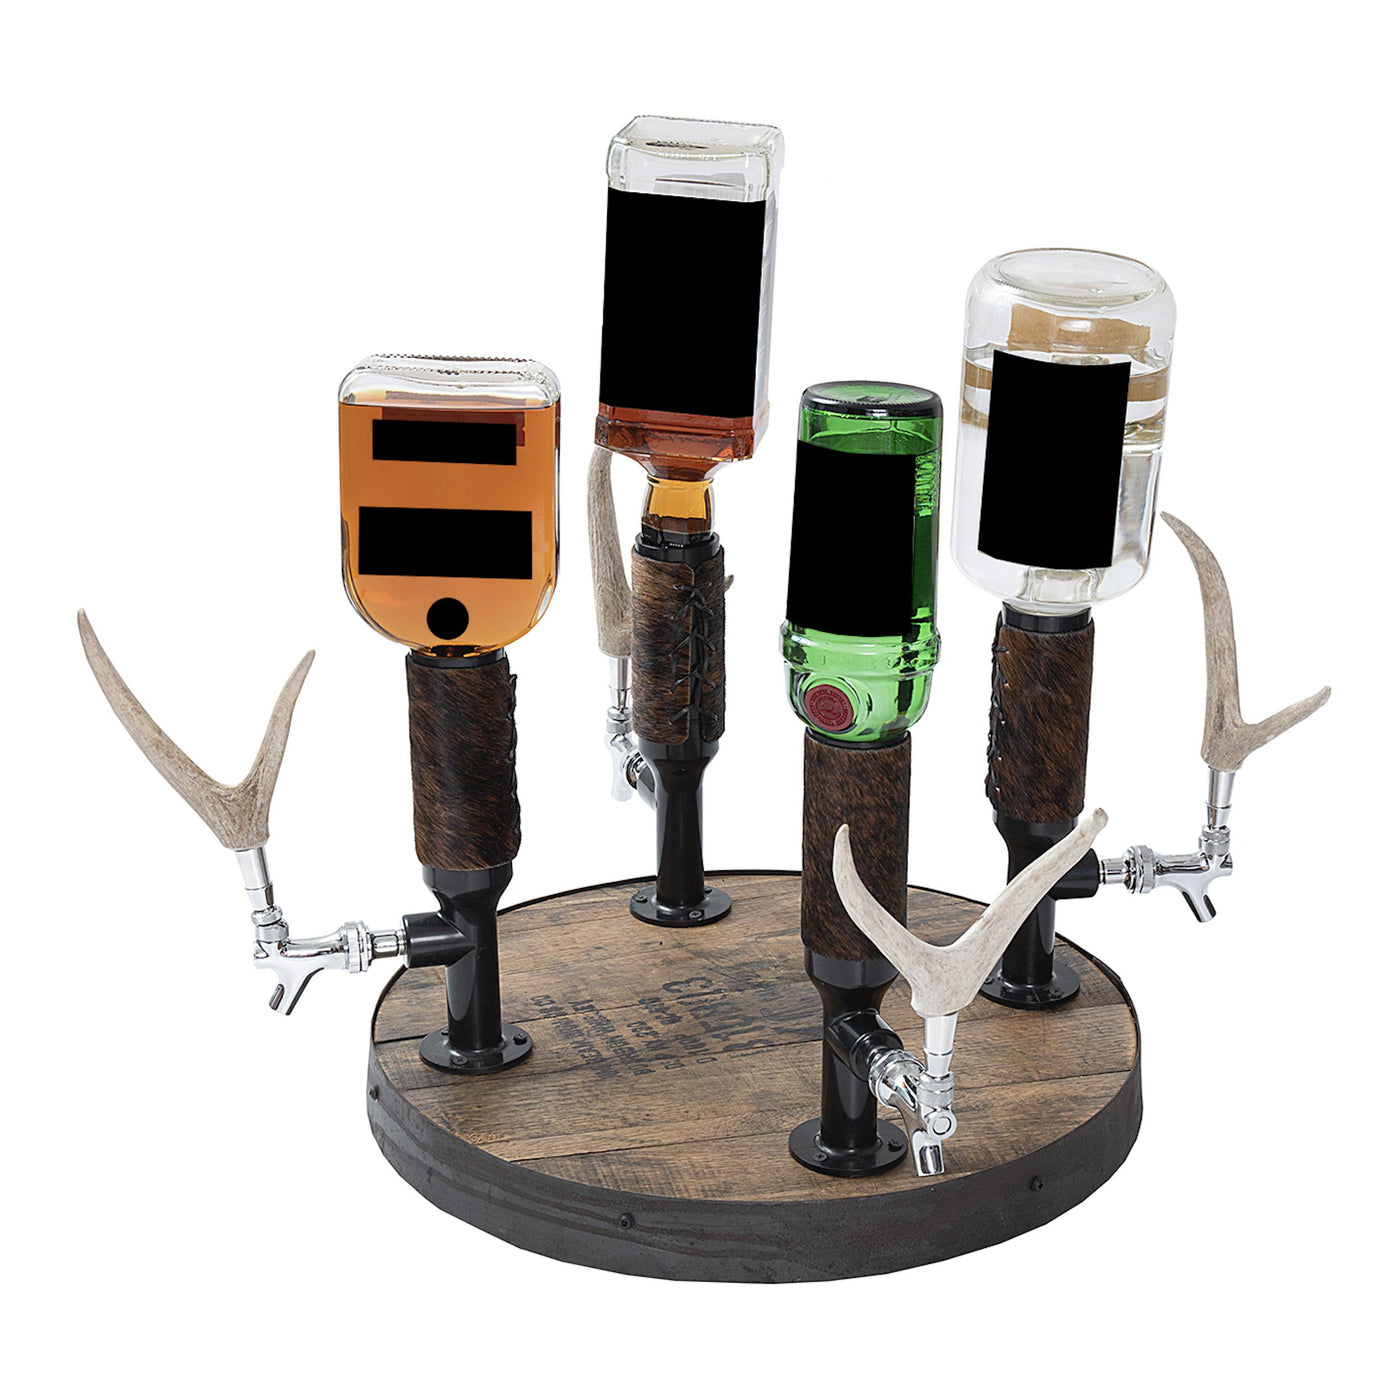 Lazy Susan Whiskey Tower 4 Bottle Liquor Dispenser-HOME/GIFTWARE-Kevin's Fine Outdoor Gear & Apparel